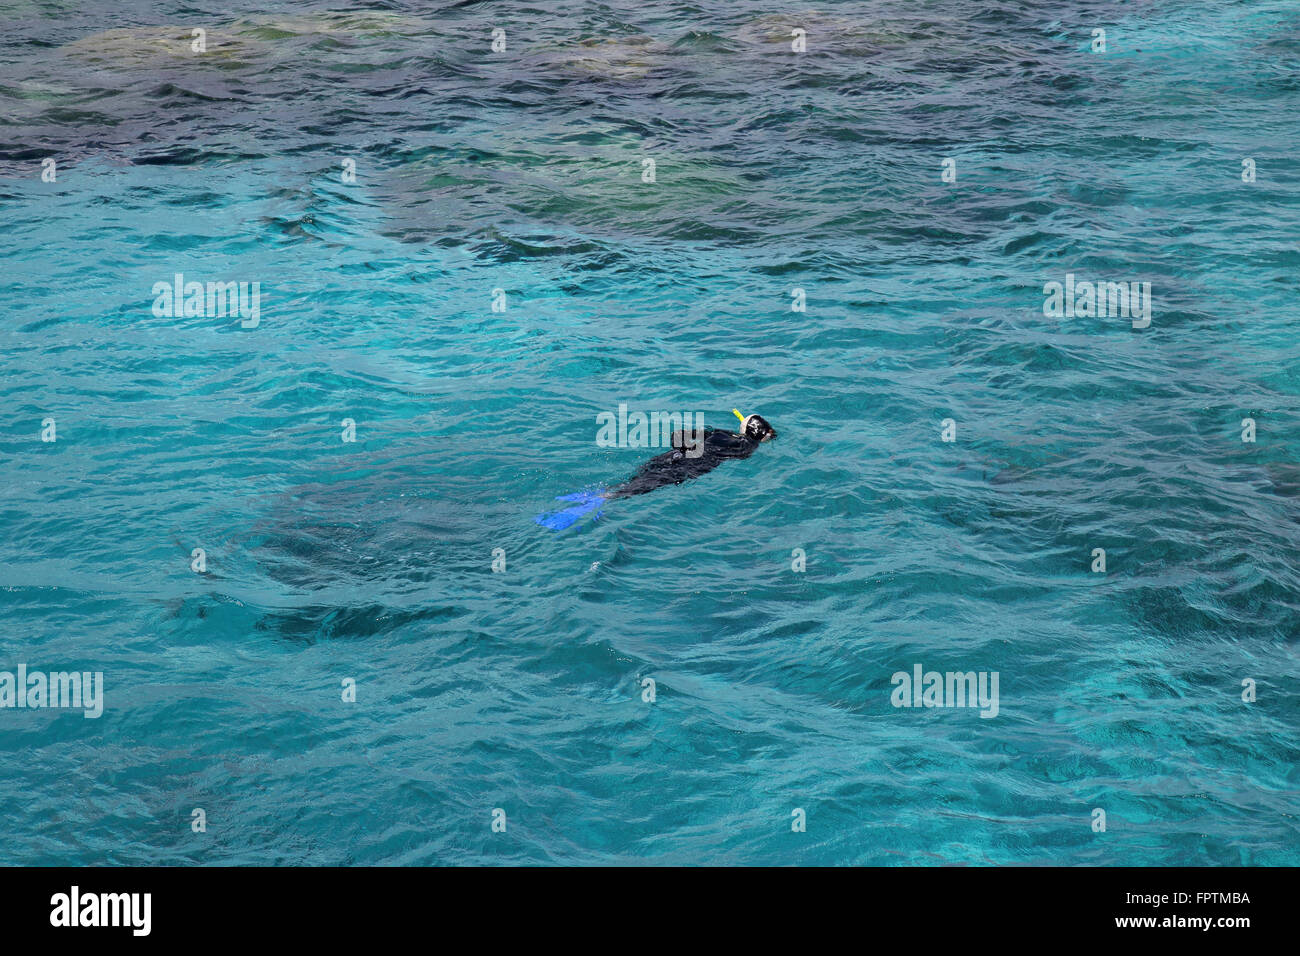 snorkeling at the outer edge of the great barrier reef in australia Stock Photo